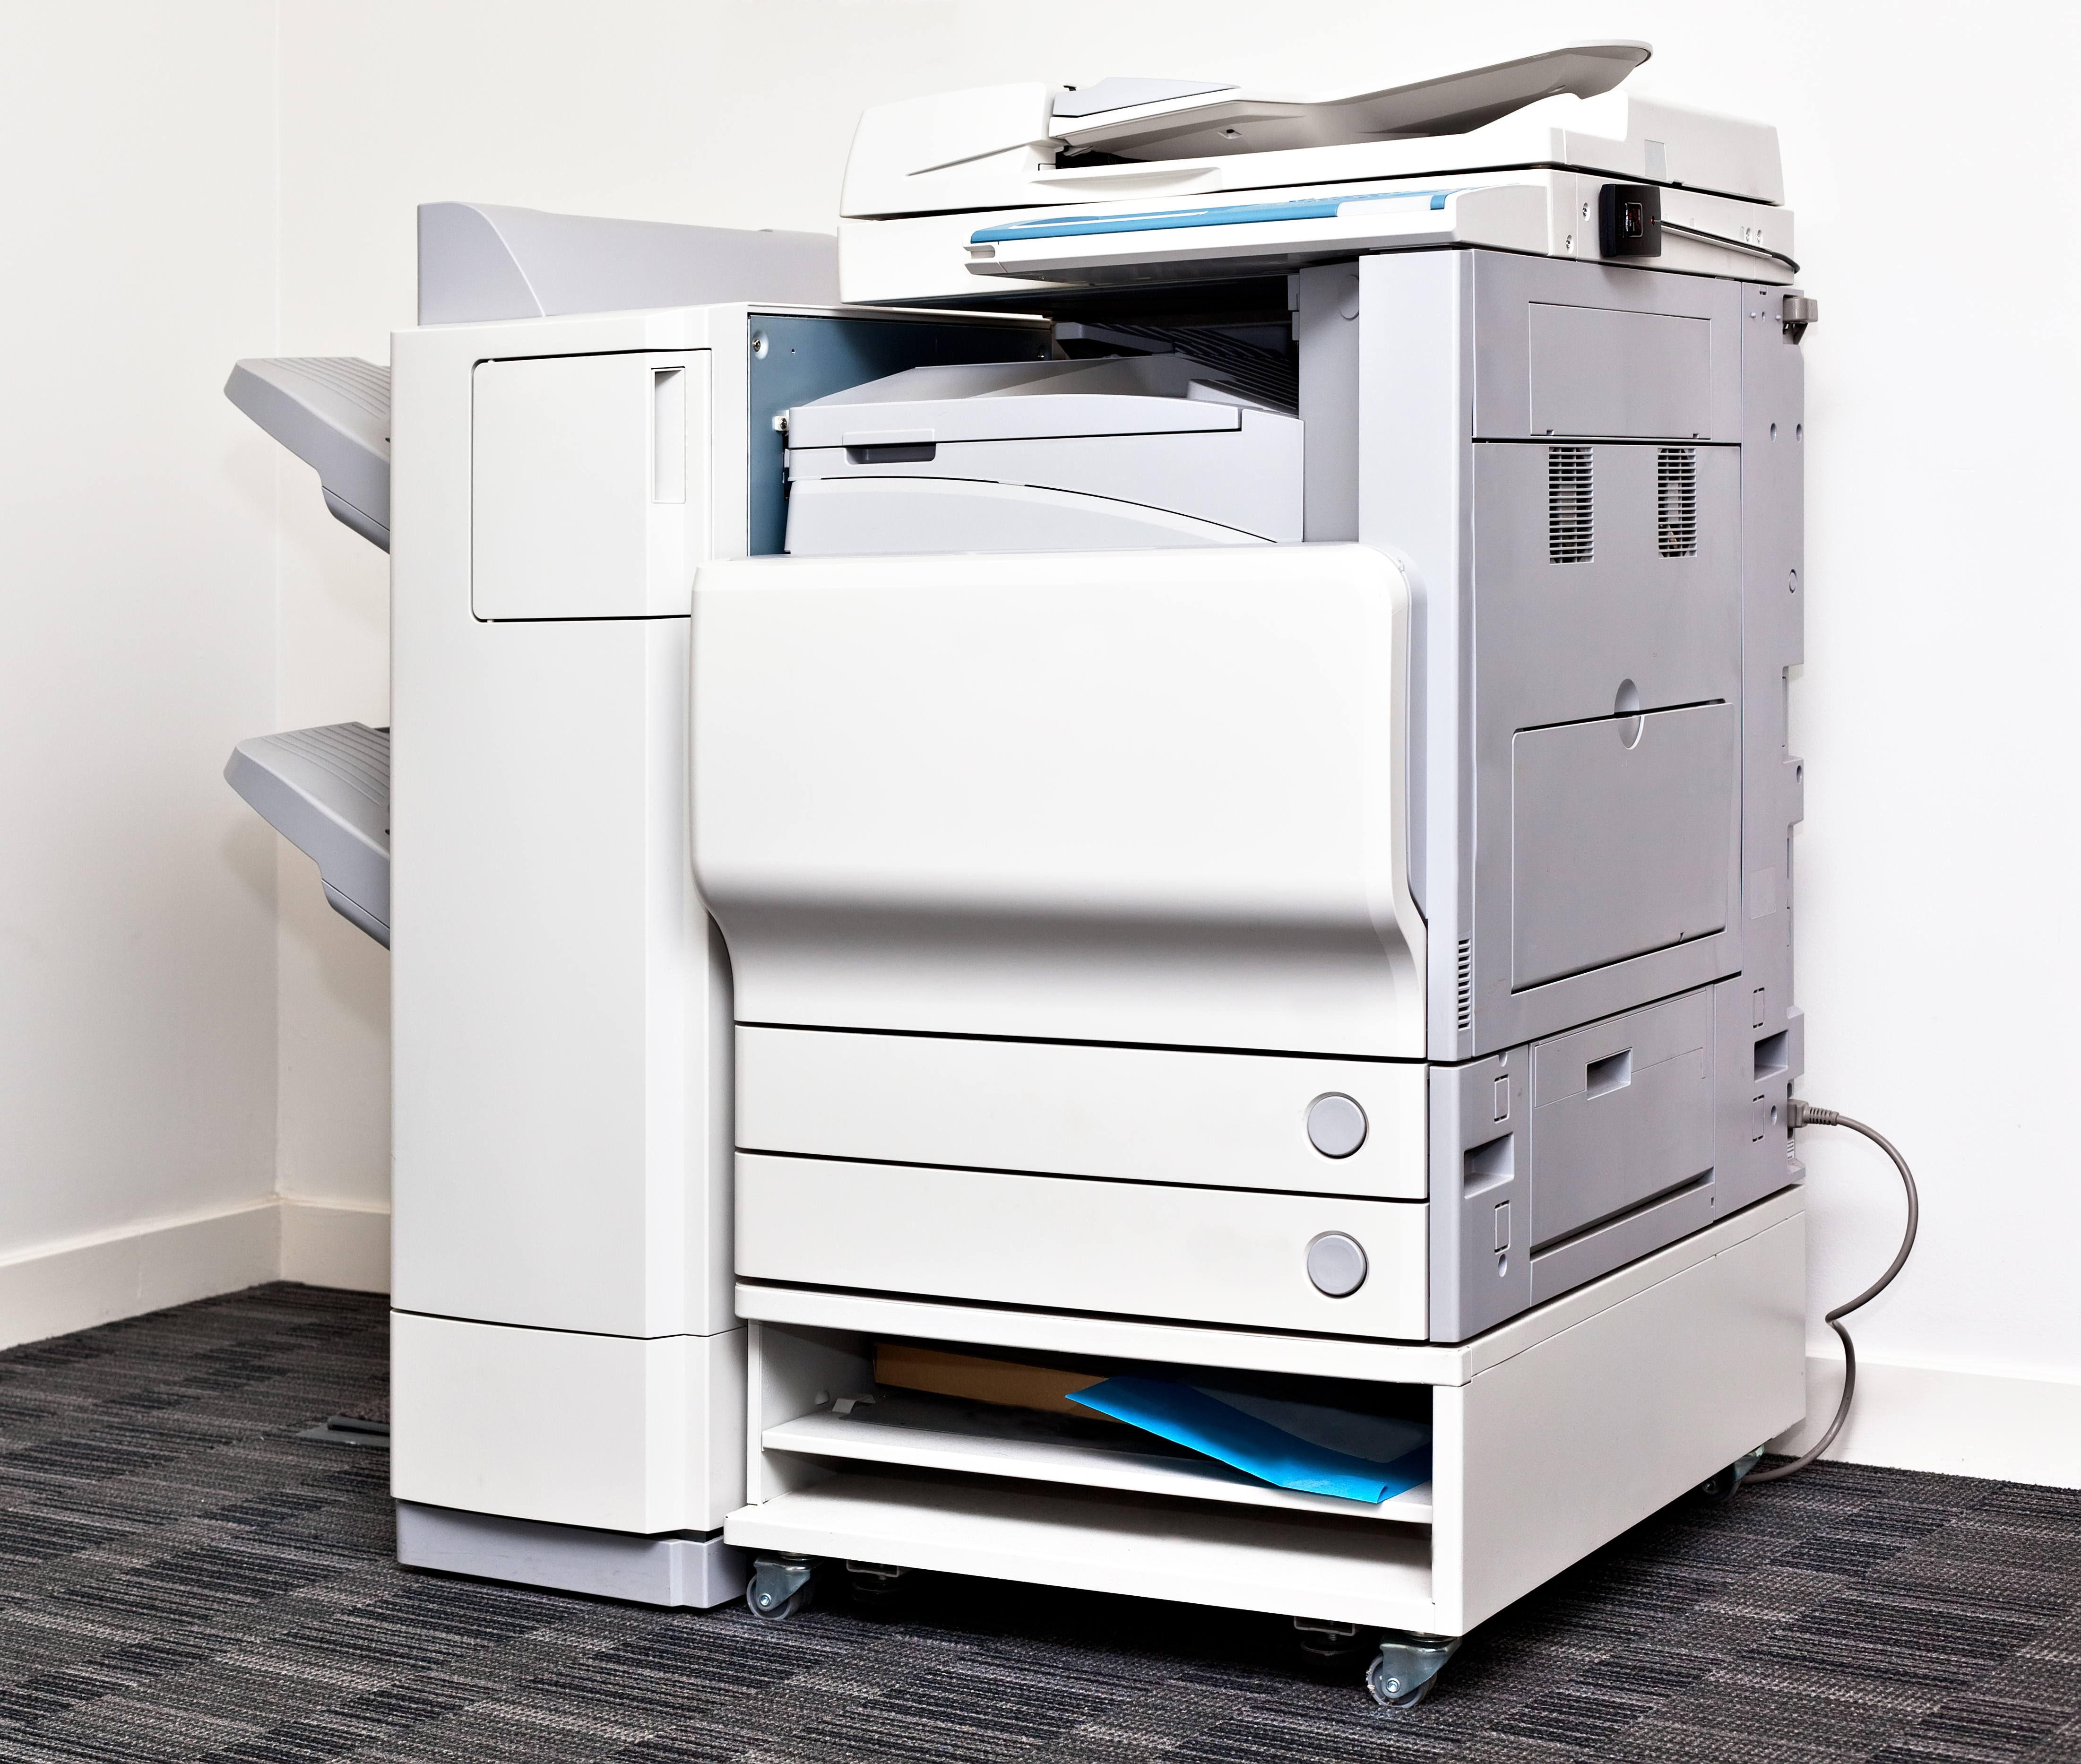 The Office People Offers Printer Repair Services In Greater Charleston. Reach us at 843-769-7774